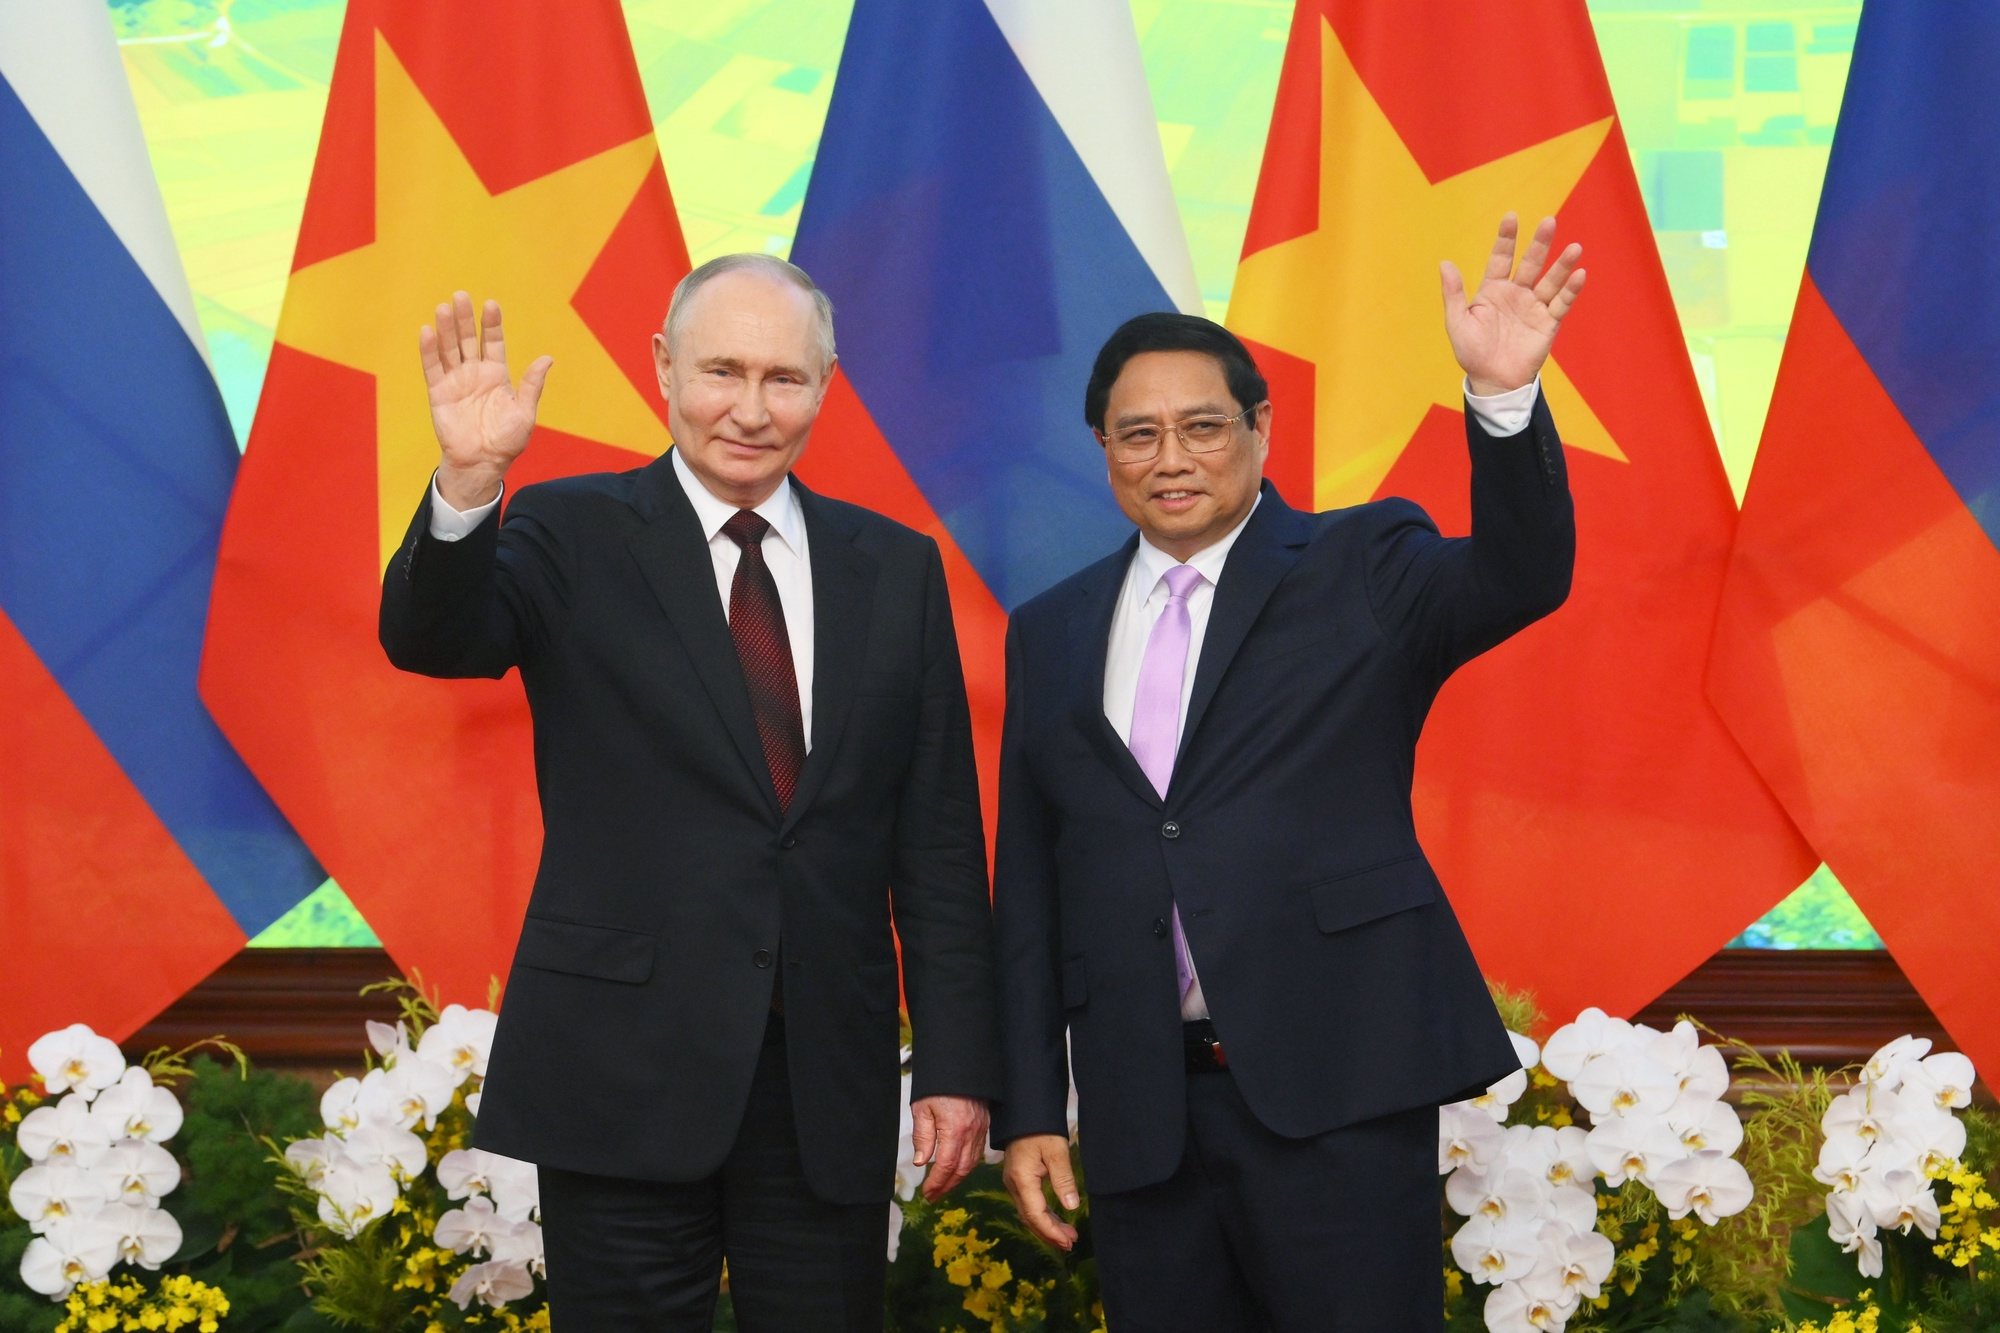 epa11424543 Russian President Vladimir Putin (L) and Vietnamese Prime Minister Pham Minh Chinh wave as they pose for a photo at the Government Office in Hanoi, Vietnam, 20 June 2024. Putin is on an official visit to Vietnam following his visit to North Korea.  EPA/KRISTINA KORMILITSYNA/SPUTNIK/KREMLIN POOL MANDATORY CREDIT